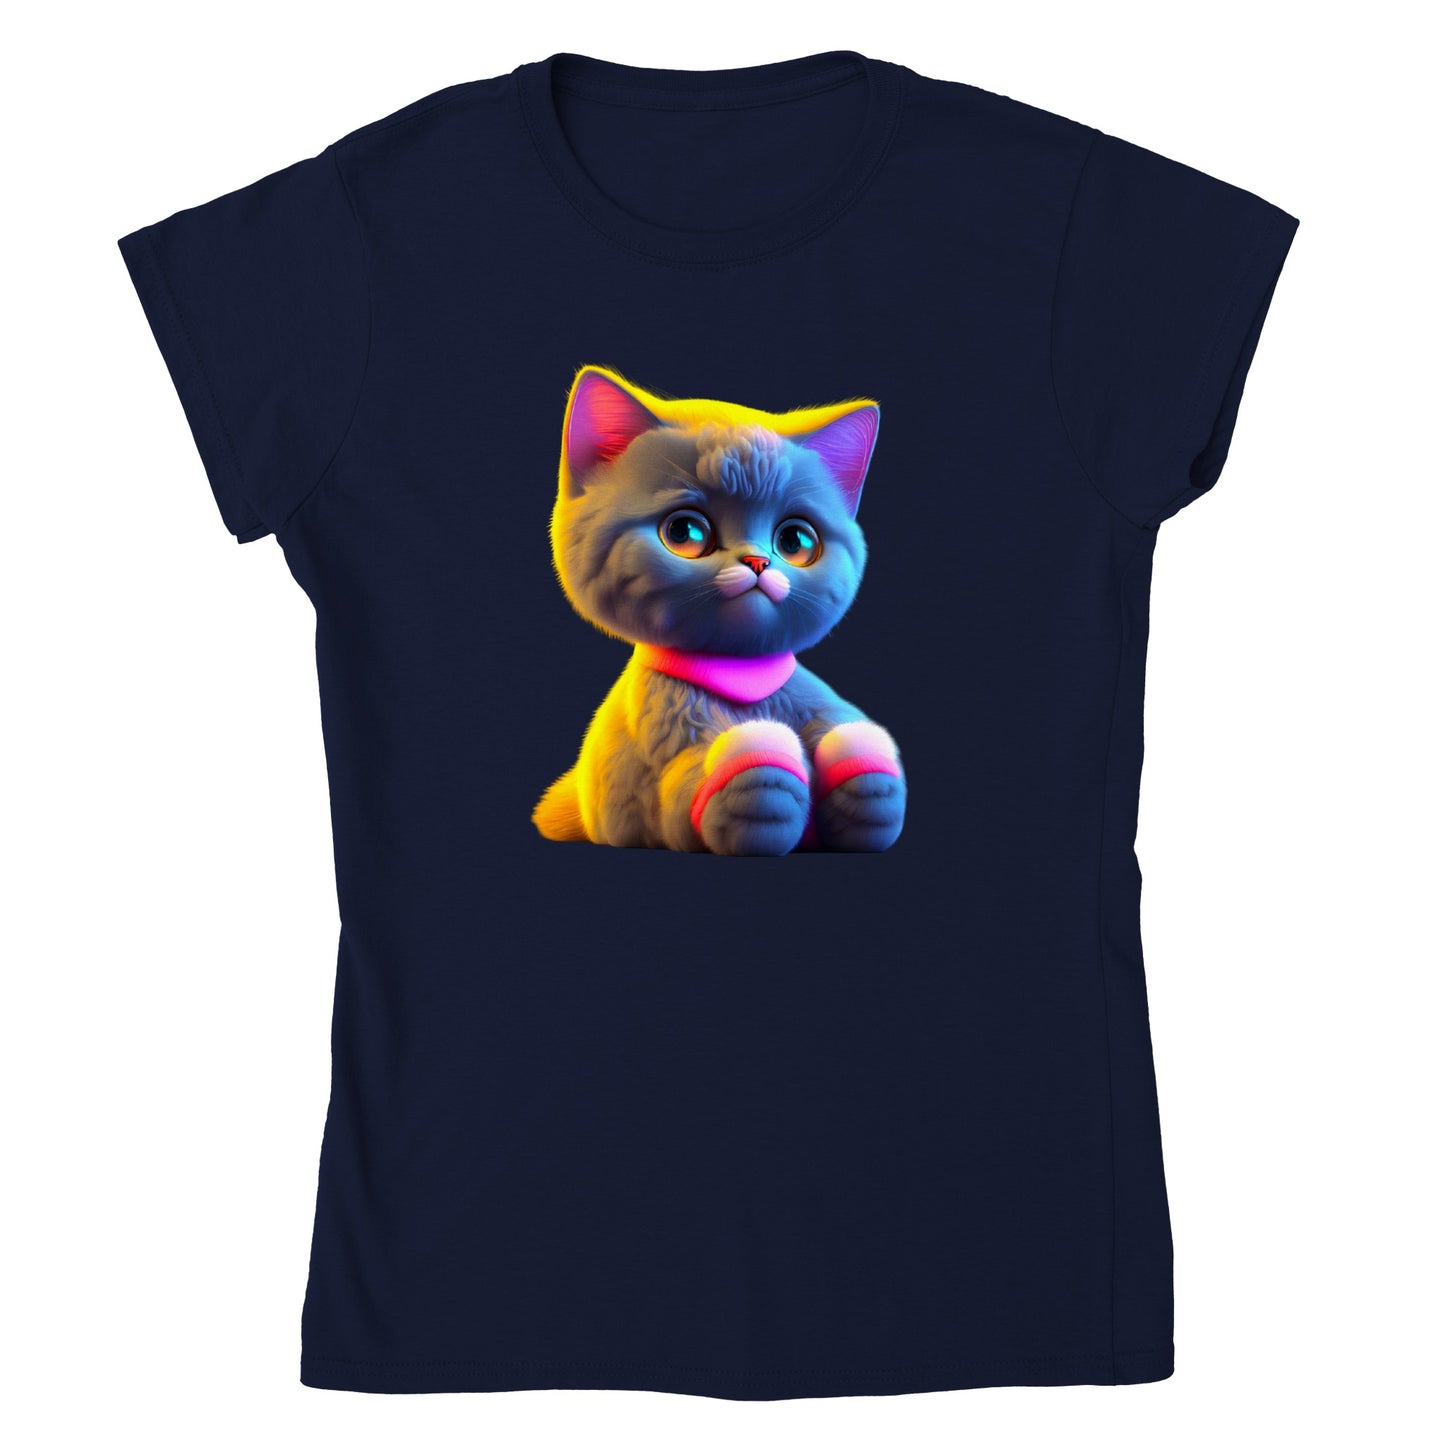 Adorable, Cool, Cute Cats and Kittens Toy - Classic Women’s Crewneck T-Shirt 39